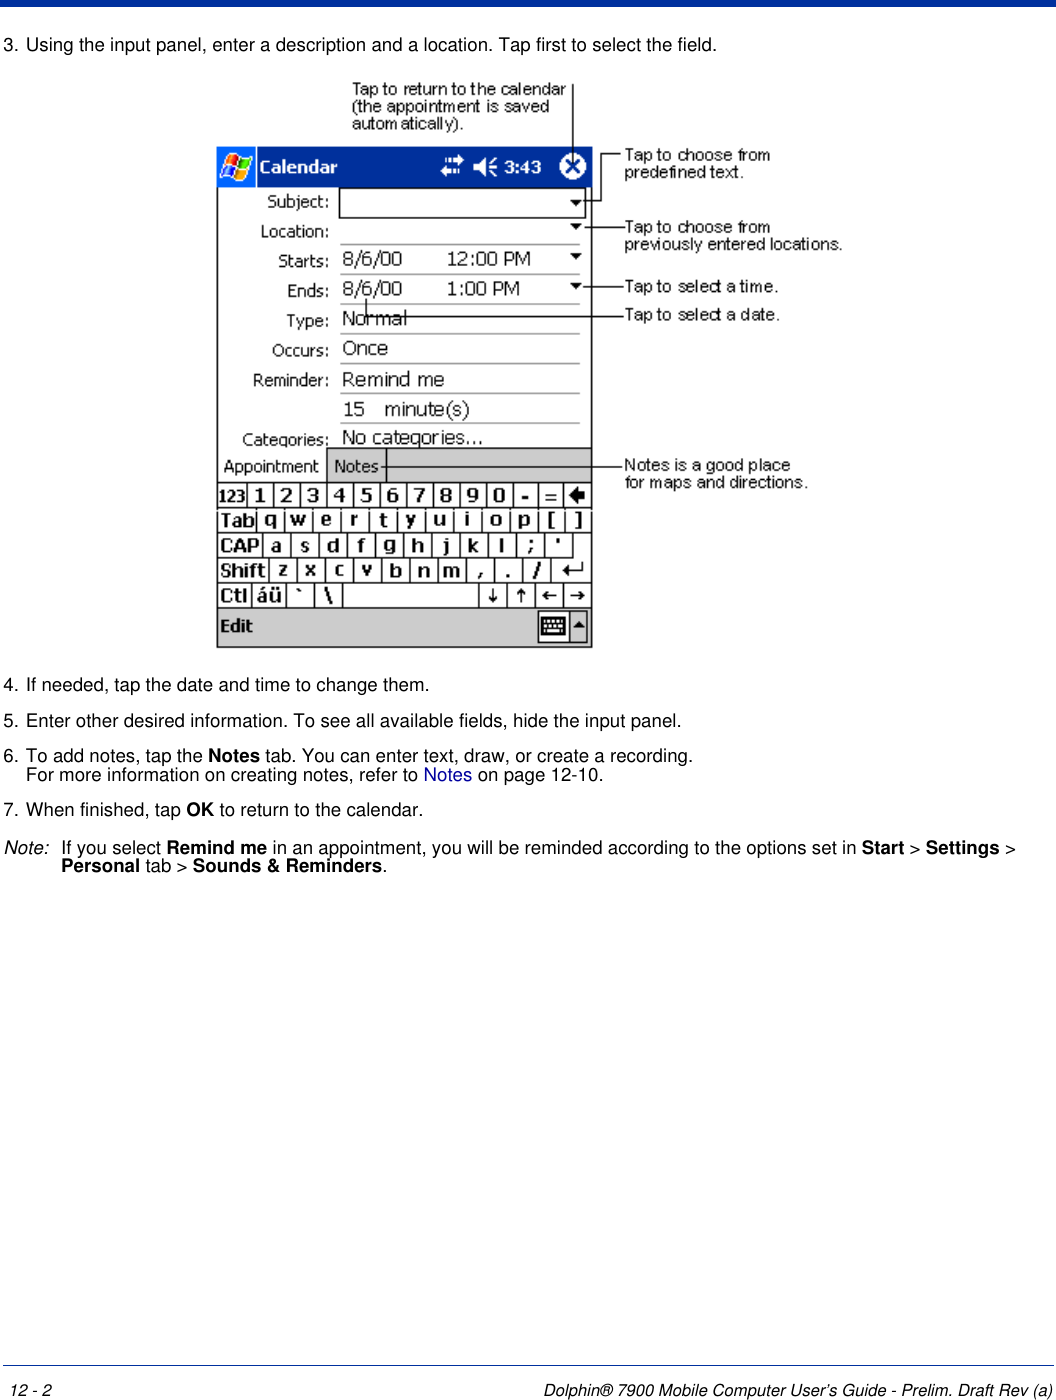 12 - 2 Dolphin® 7900 Mobile Computer User’s Guide - Prelim. Draft Rev (a)3. Using the input panel, enter a description and a location. Tap first to select the field. 4. If needed, tap the date and time to change them.5. Enter other desired information. To see all available fields, hide the input panel.6. To add notes, tap the Notes tab. You can enter text, draw, or create a recording.  For more information on creating notes, refer to Notes on page 12-10.7. When finished, tap OK to return to the calendar. Note: If you select Remind me in an appointment, you will be reminded according to the options set in Start &gt; Settings &gt; Personal tab &gt; Sounds &amp; Reminders. 